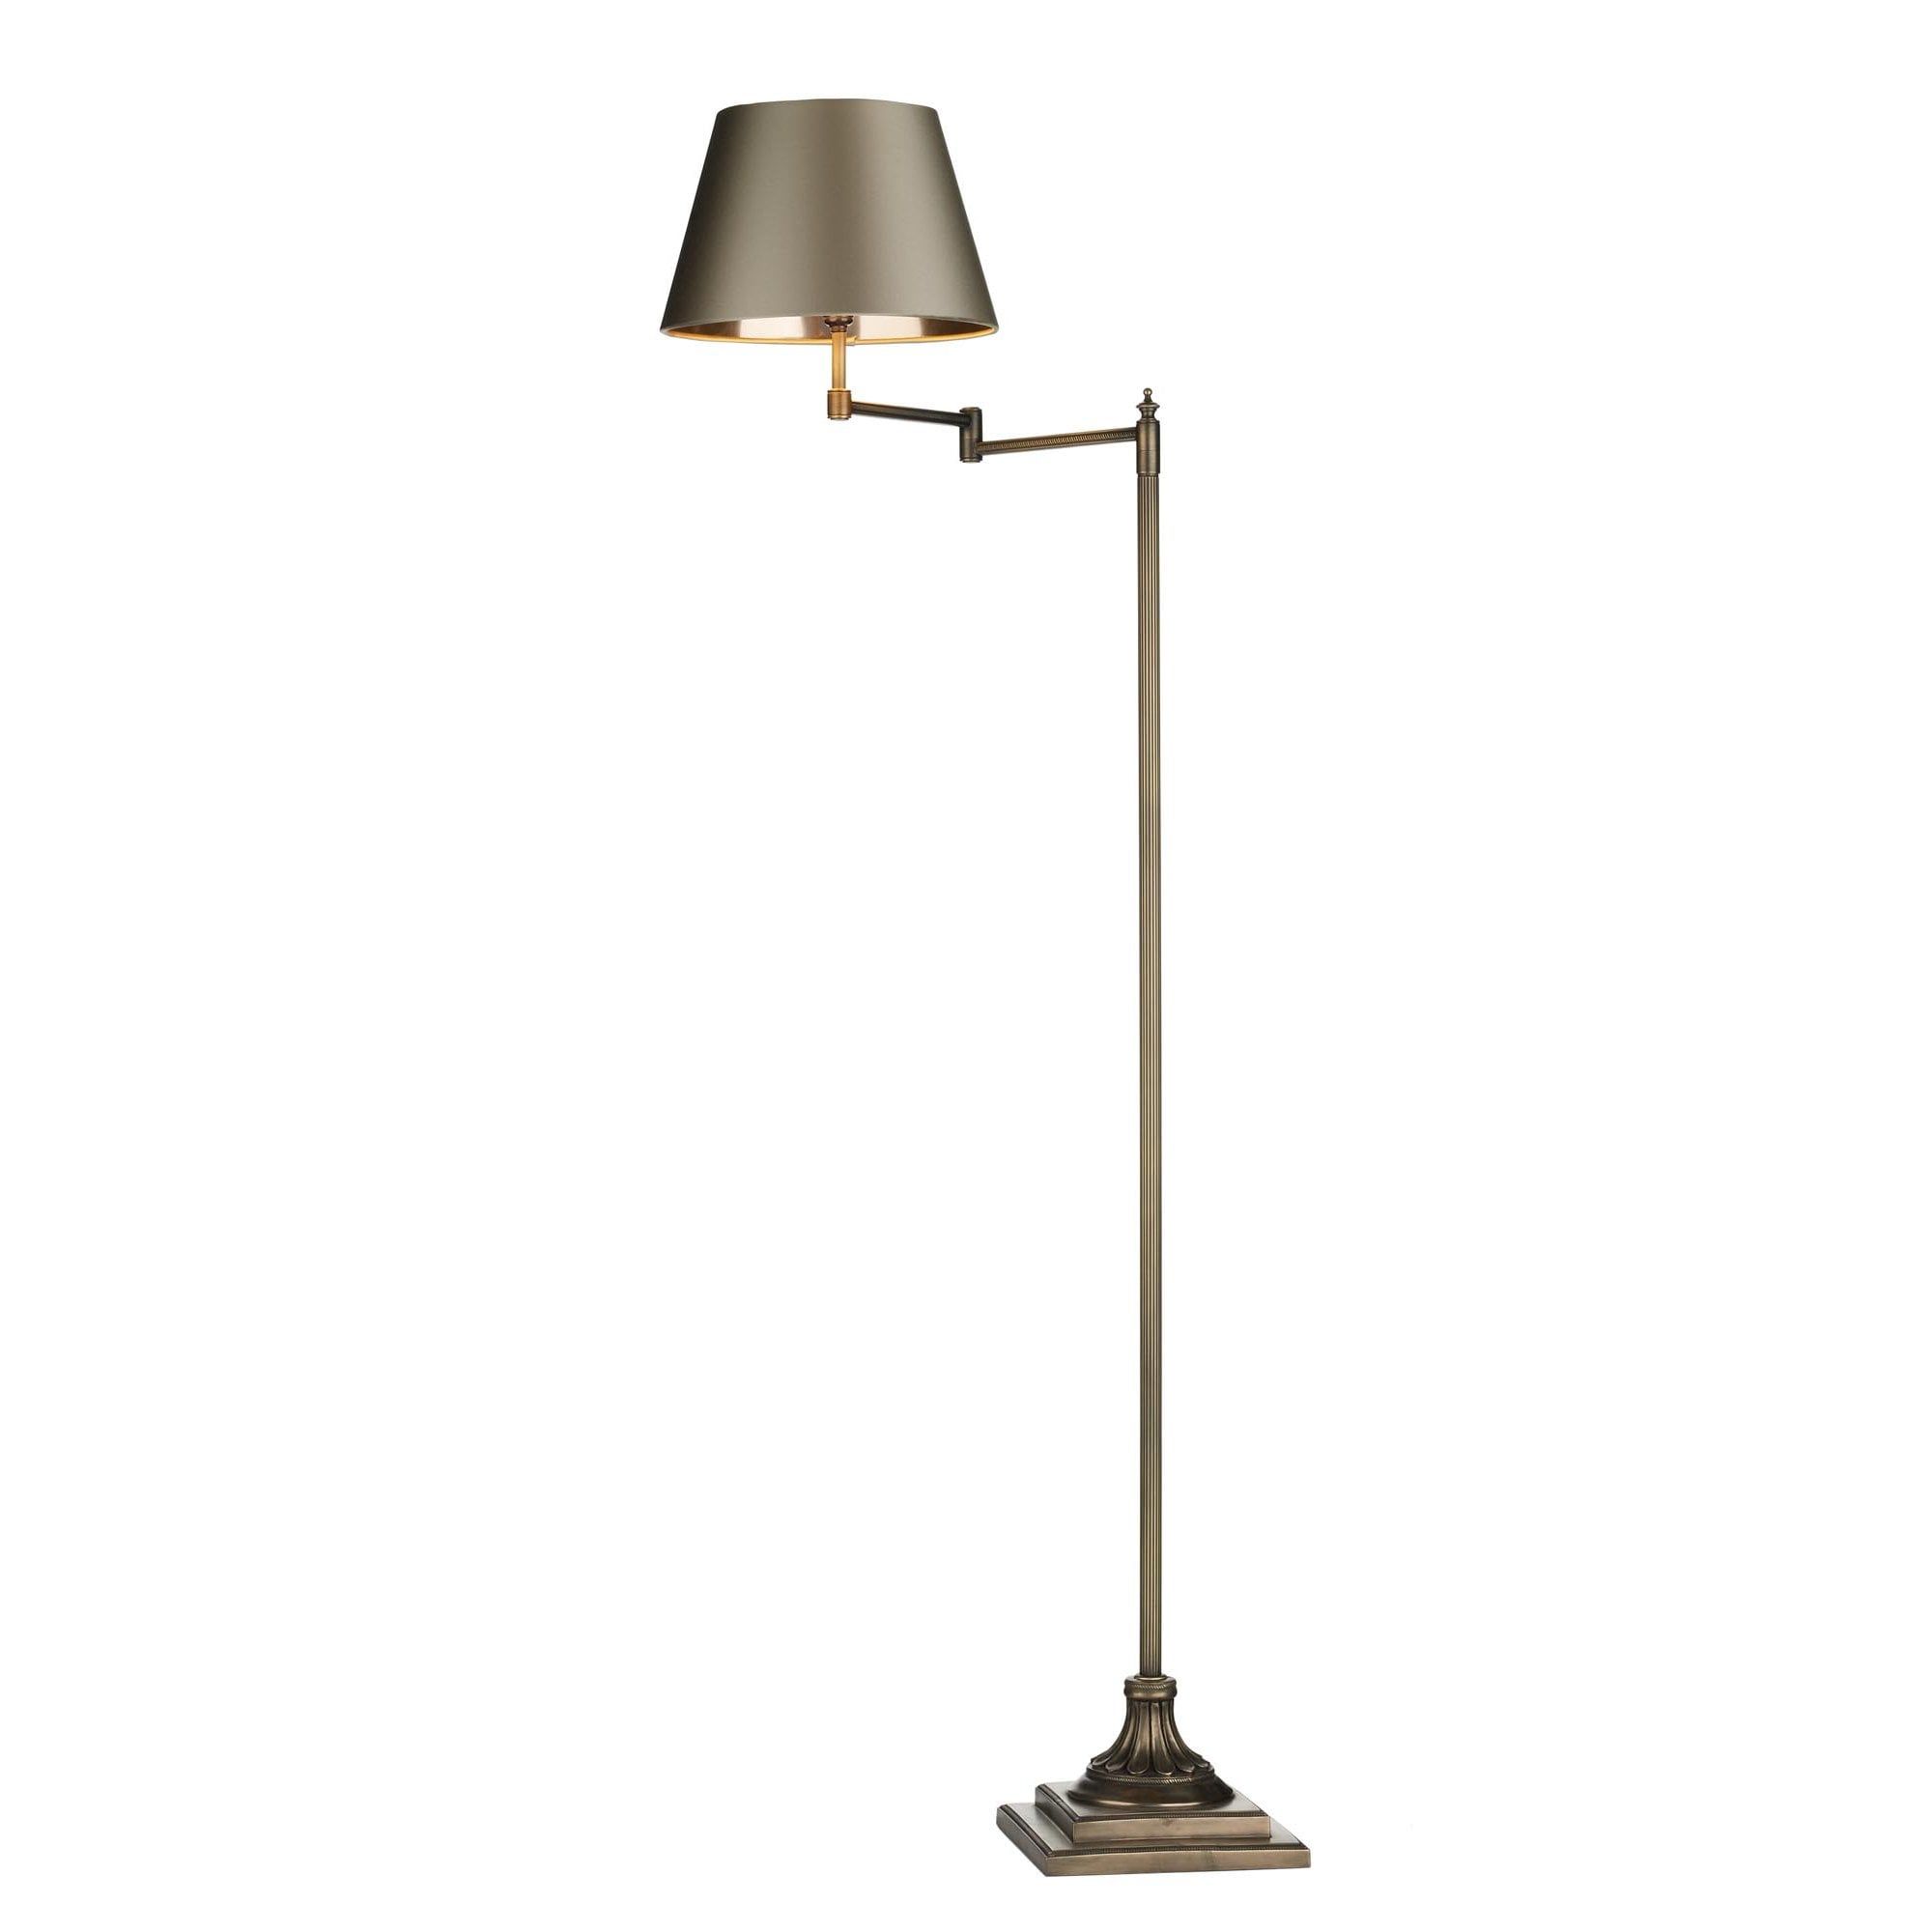 Well Known Antique Brass Floor Lamps In Floor Lamp Antique Brass With Swivel Arm Right Lighting And Lights Uk (View 14 of 15)